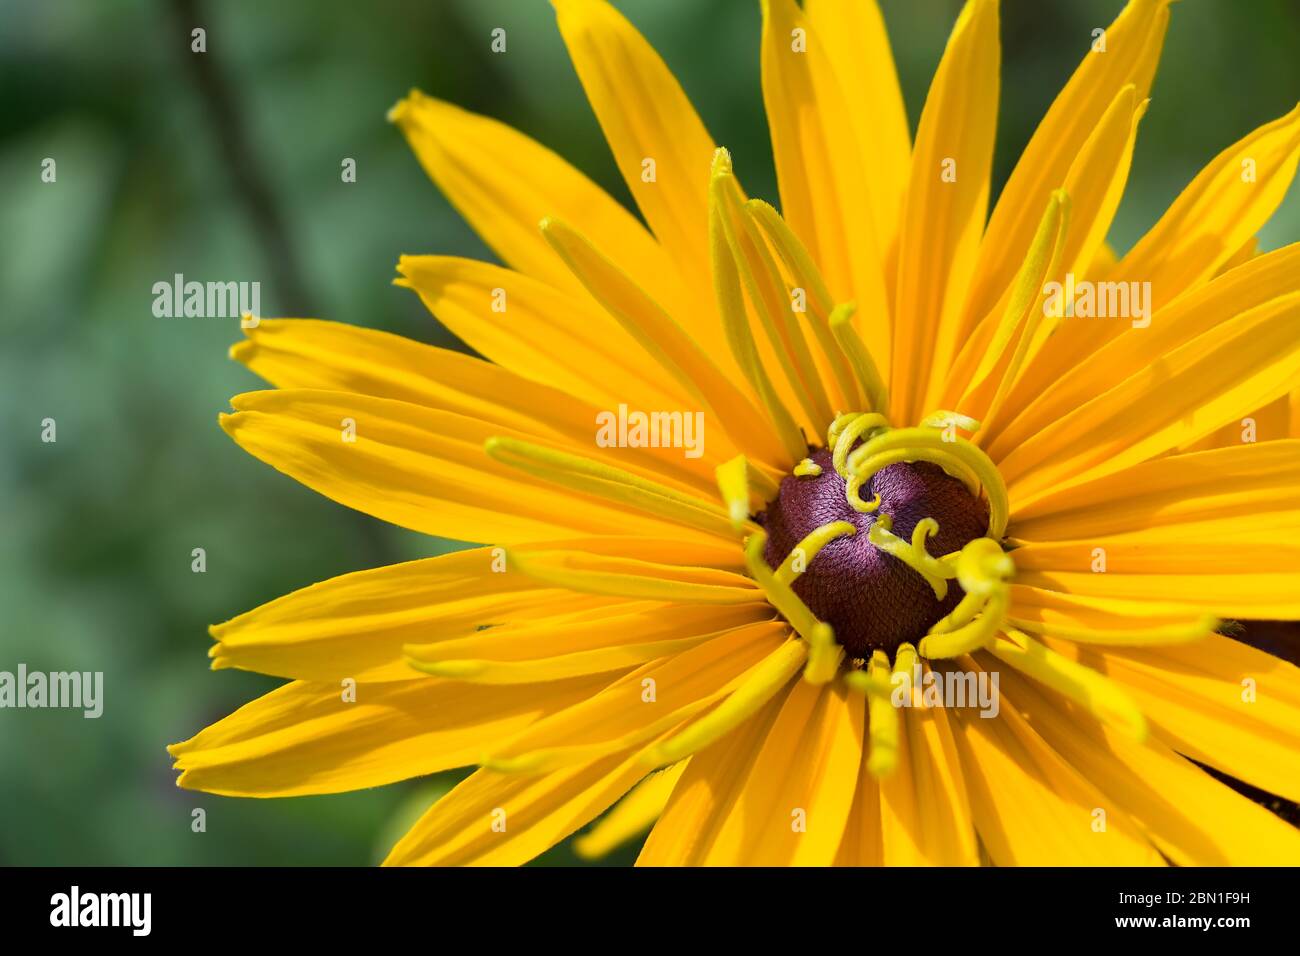 One yellow flower of rudbeckia in the garden. Stock Photo